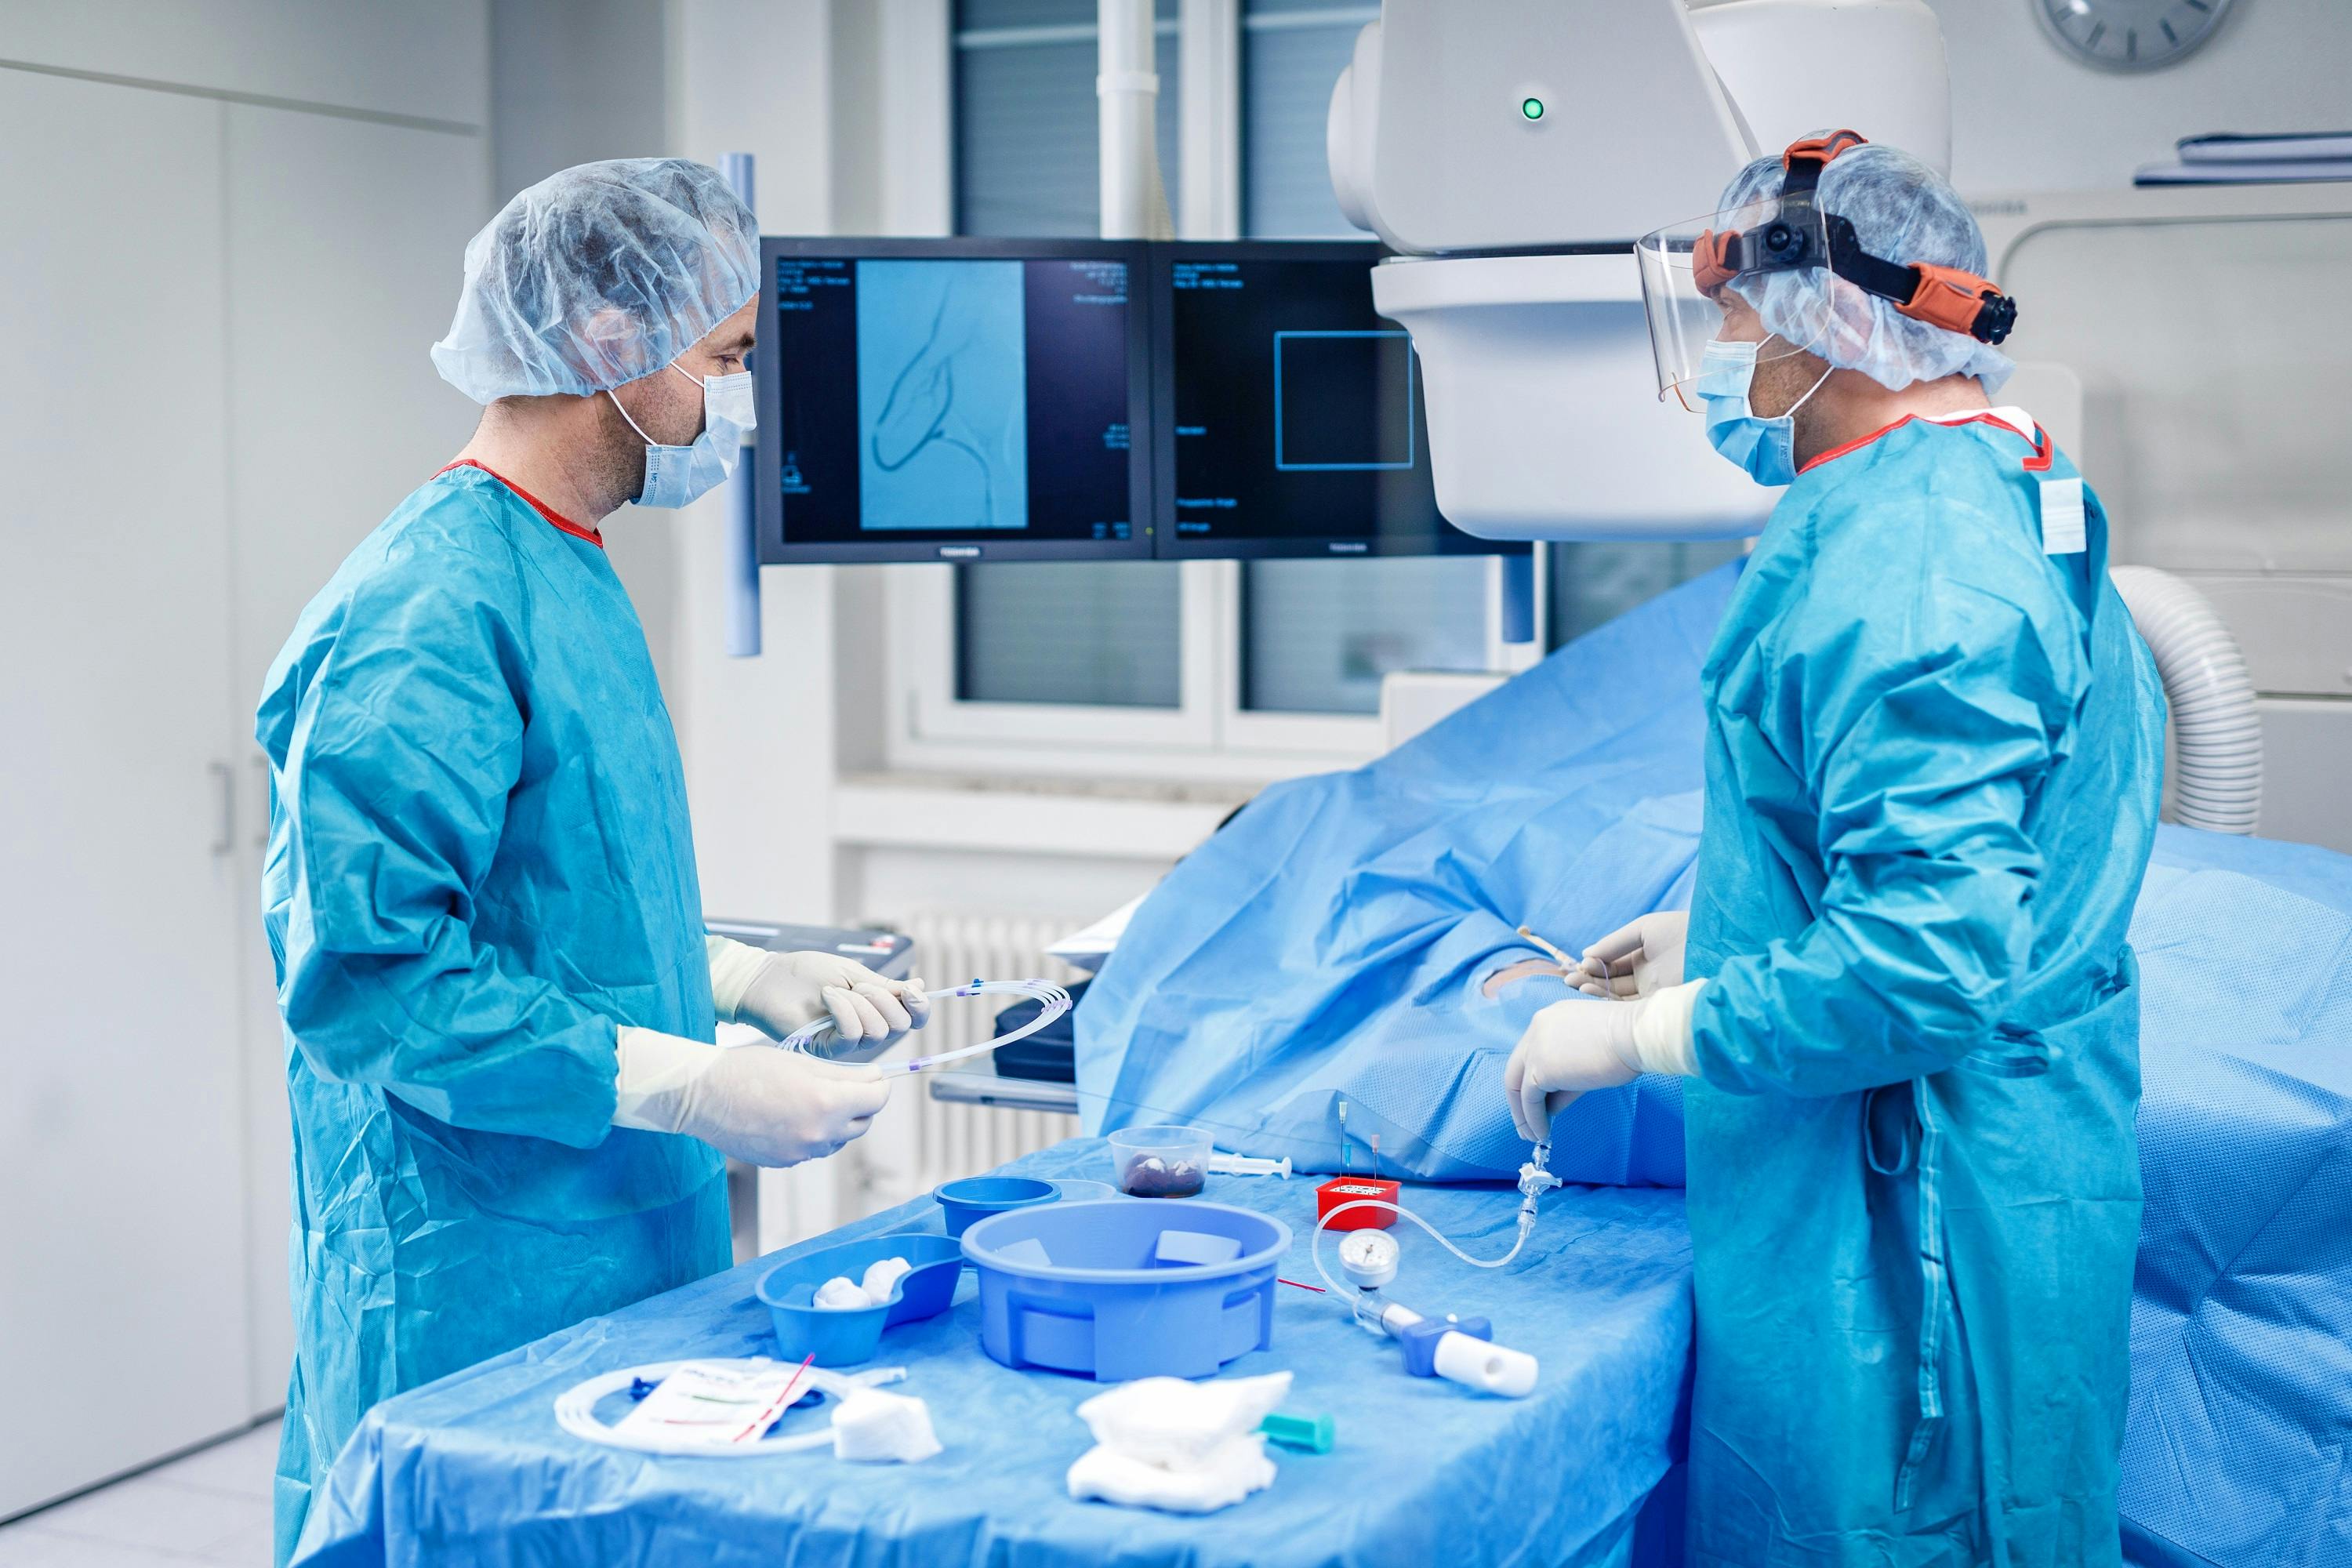 Two surgeons in sterile clothing at work in the operating theatre with medical instruments and a surveillance monitor.